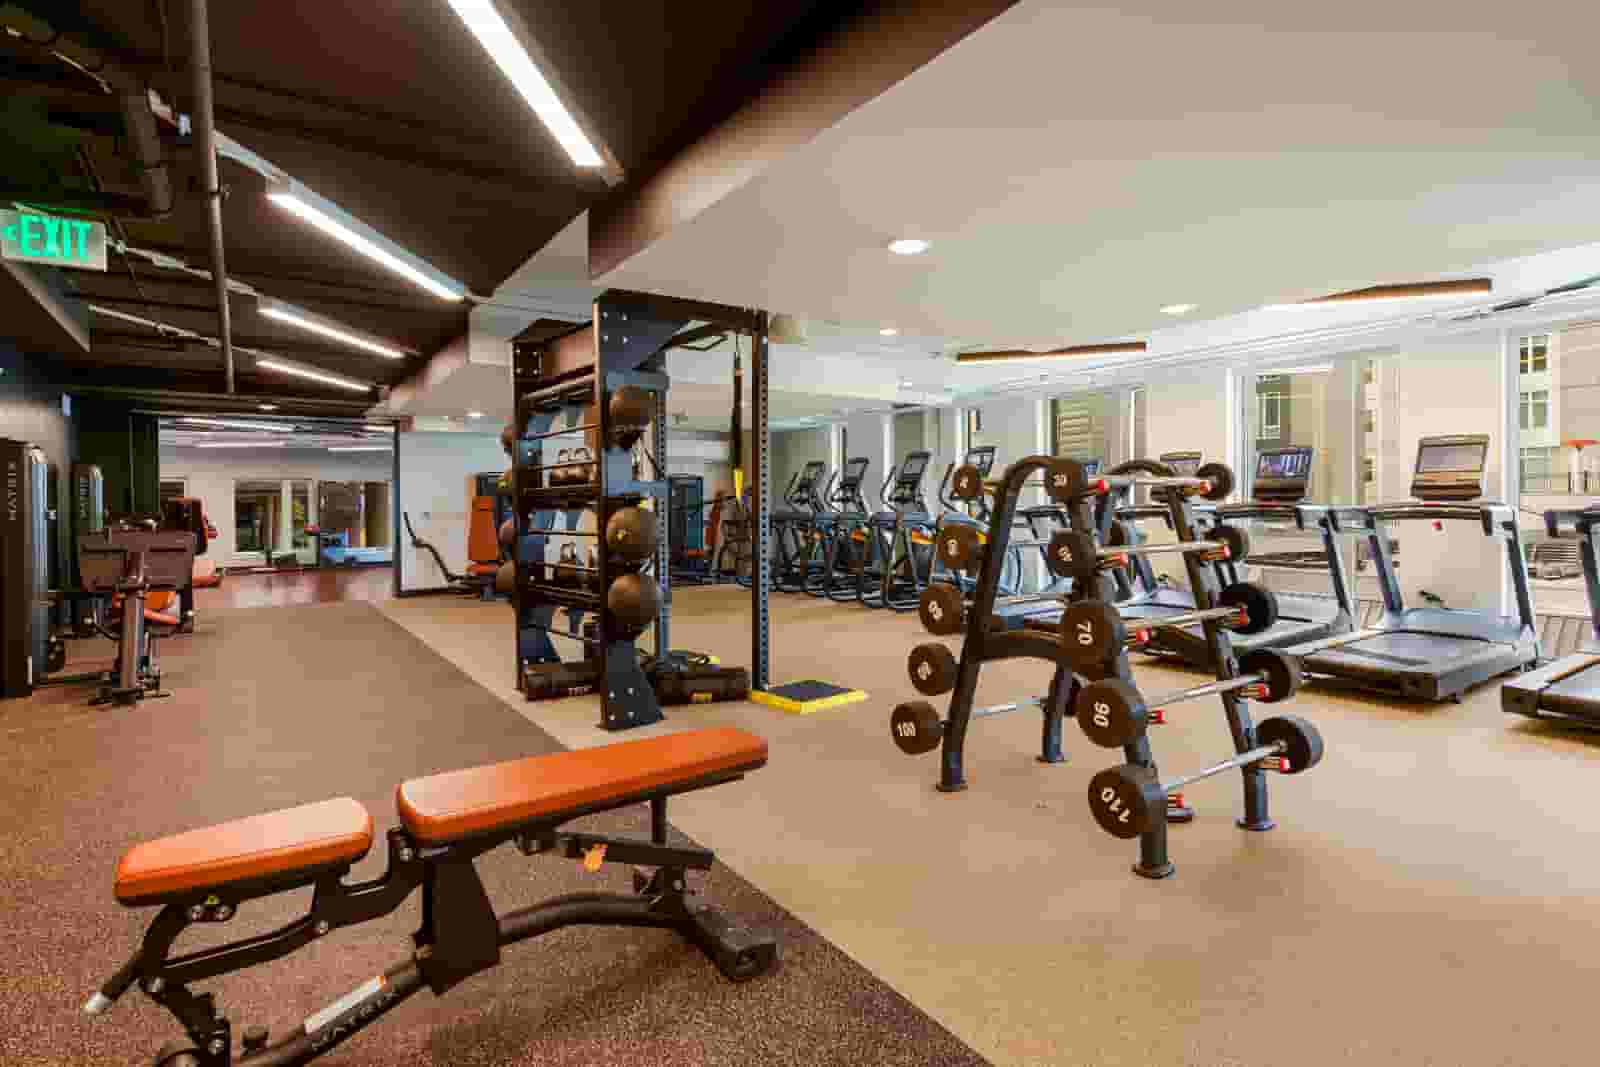 Fully-featured, 24 hour Fitness Center with all the gear you need